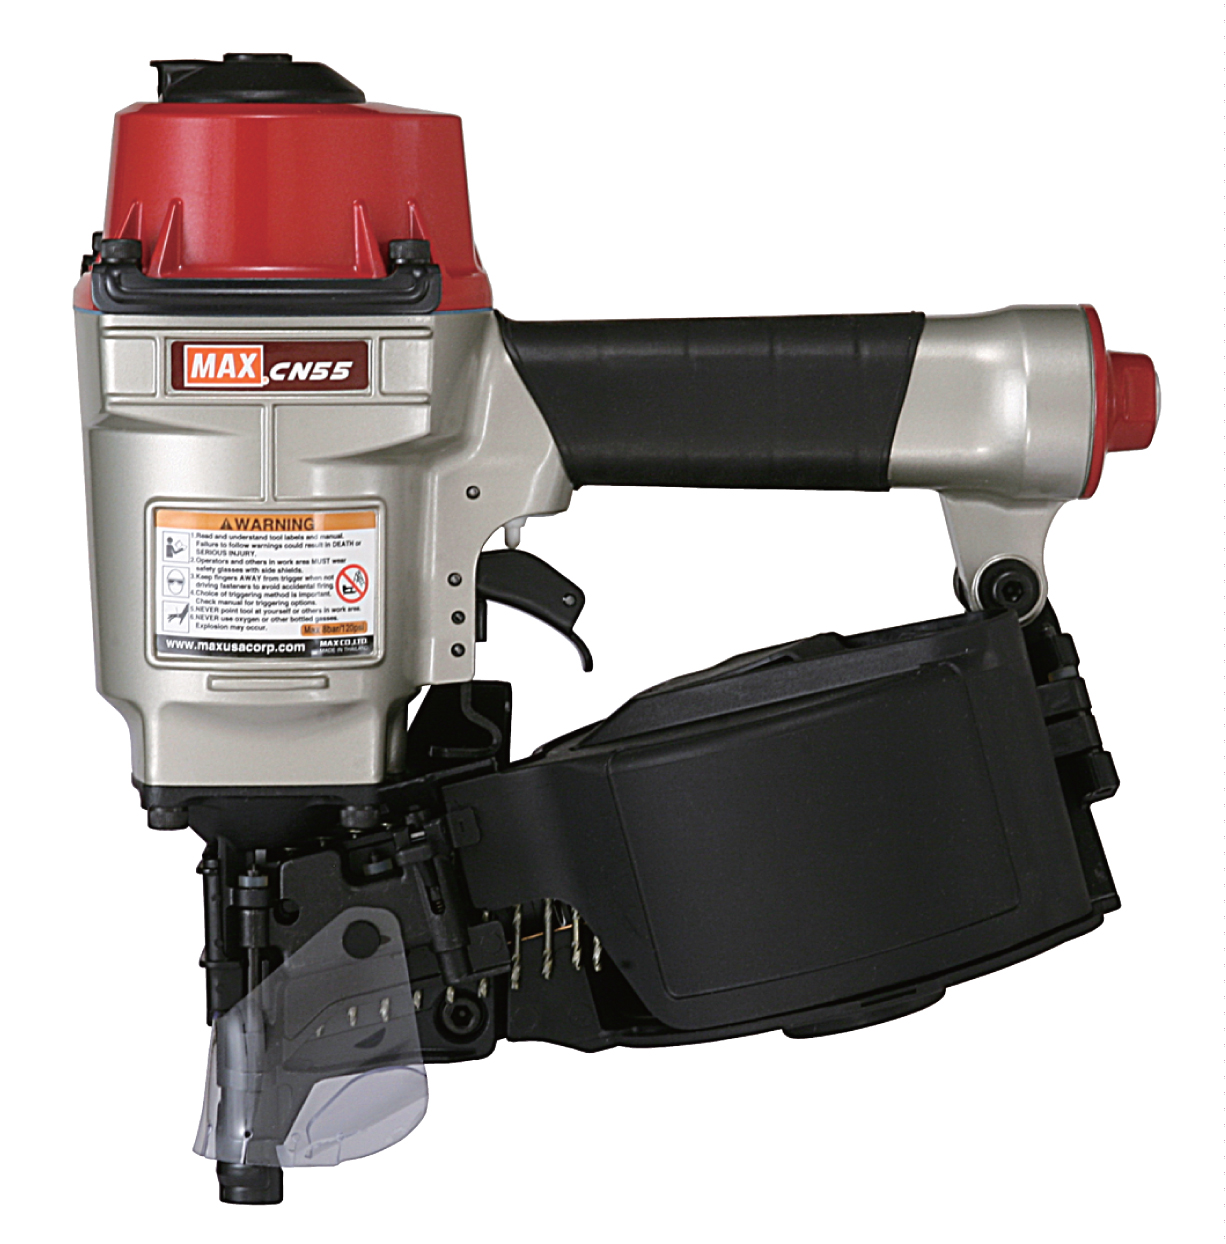 MAX 15 DEGREE 2-1/4" COIL NAILER .083"-.090" X 1"-2 1/4" BOSTITCH TYPE FLAT COIL